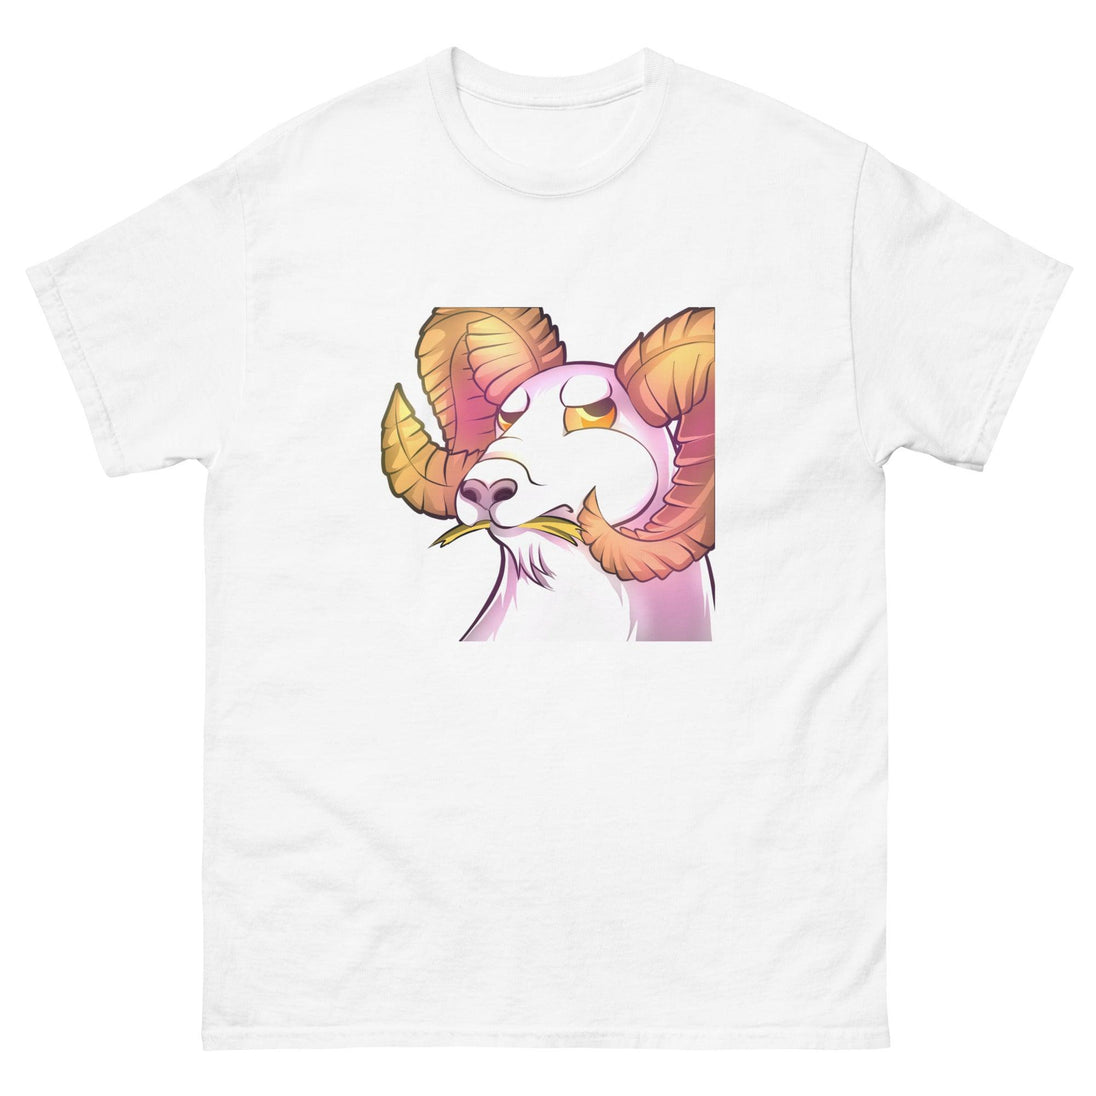 Angry Goat Gamer/Streamer T-Shirt - 100% Soft Cotton, Made in USA - StreamersVisuals